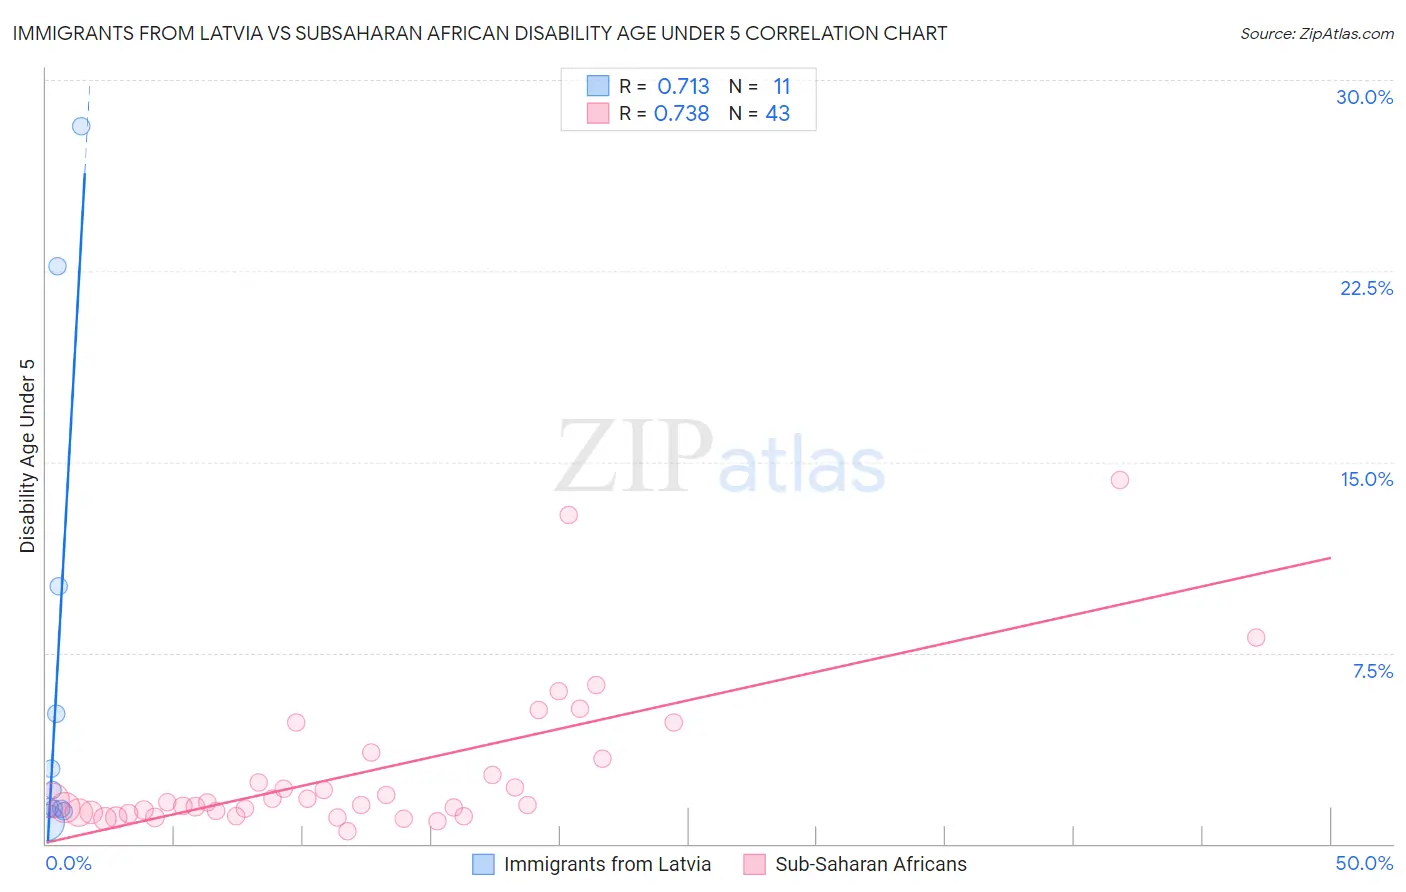 Immigrants from Latvia vs Subsaharan African Disability Age Under 5